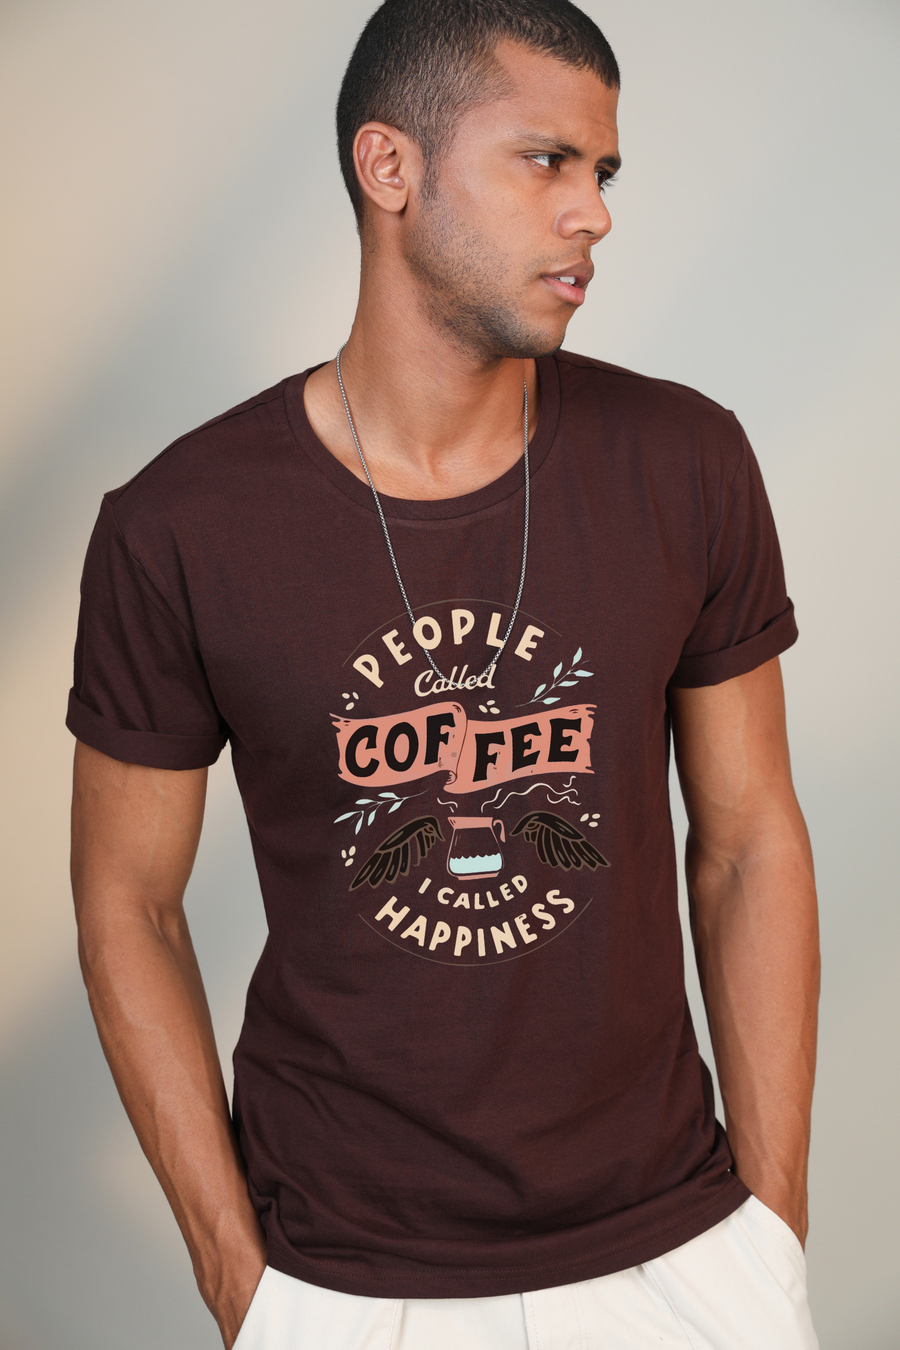 People called coffee: i called Happiness- Half sleeve t-shirt